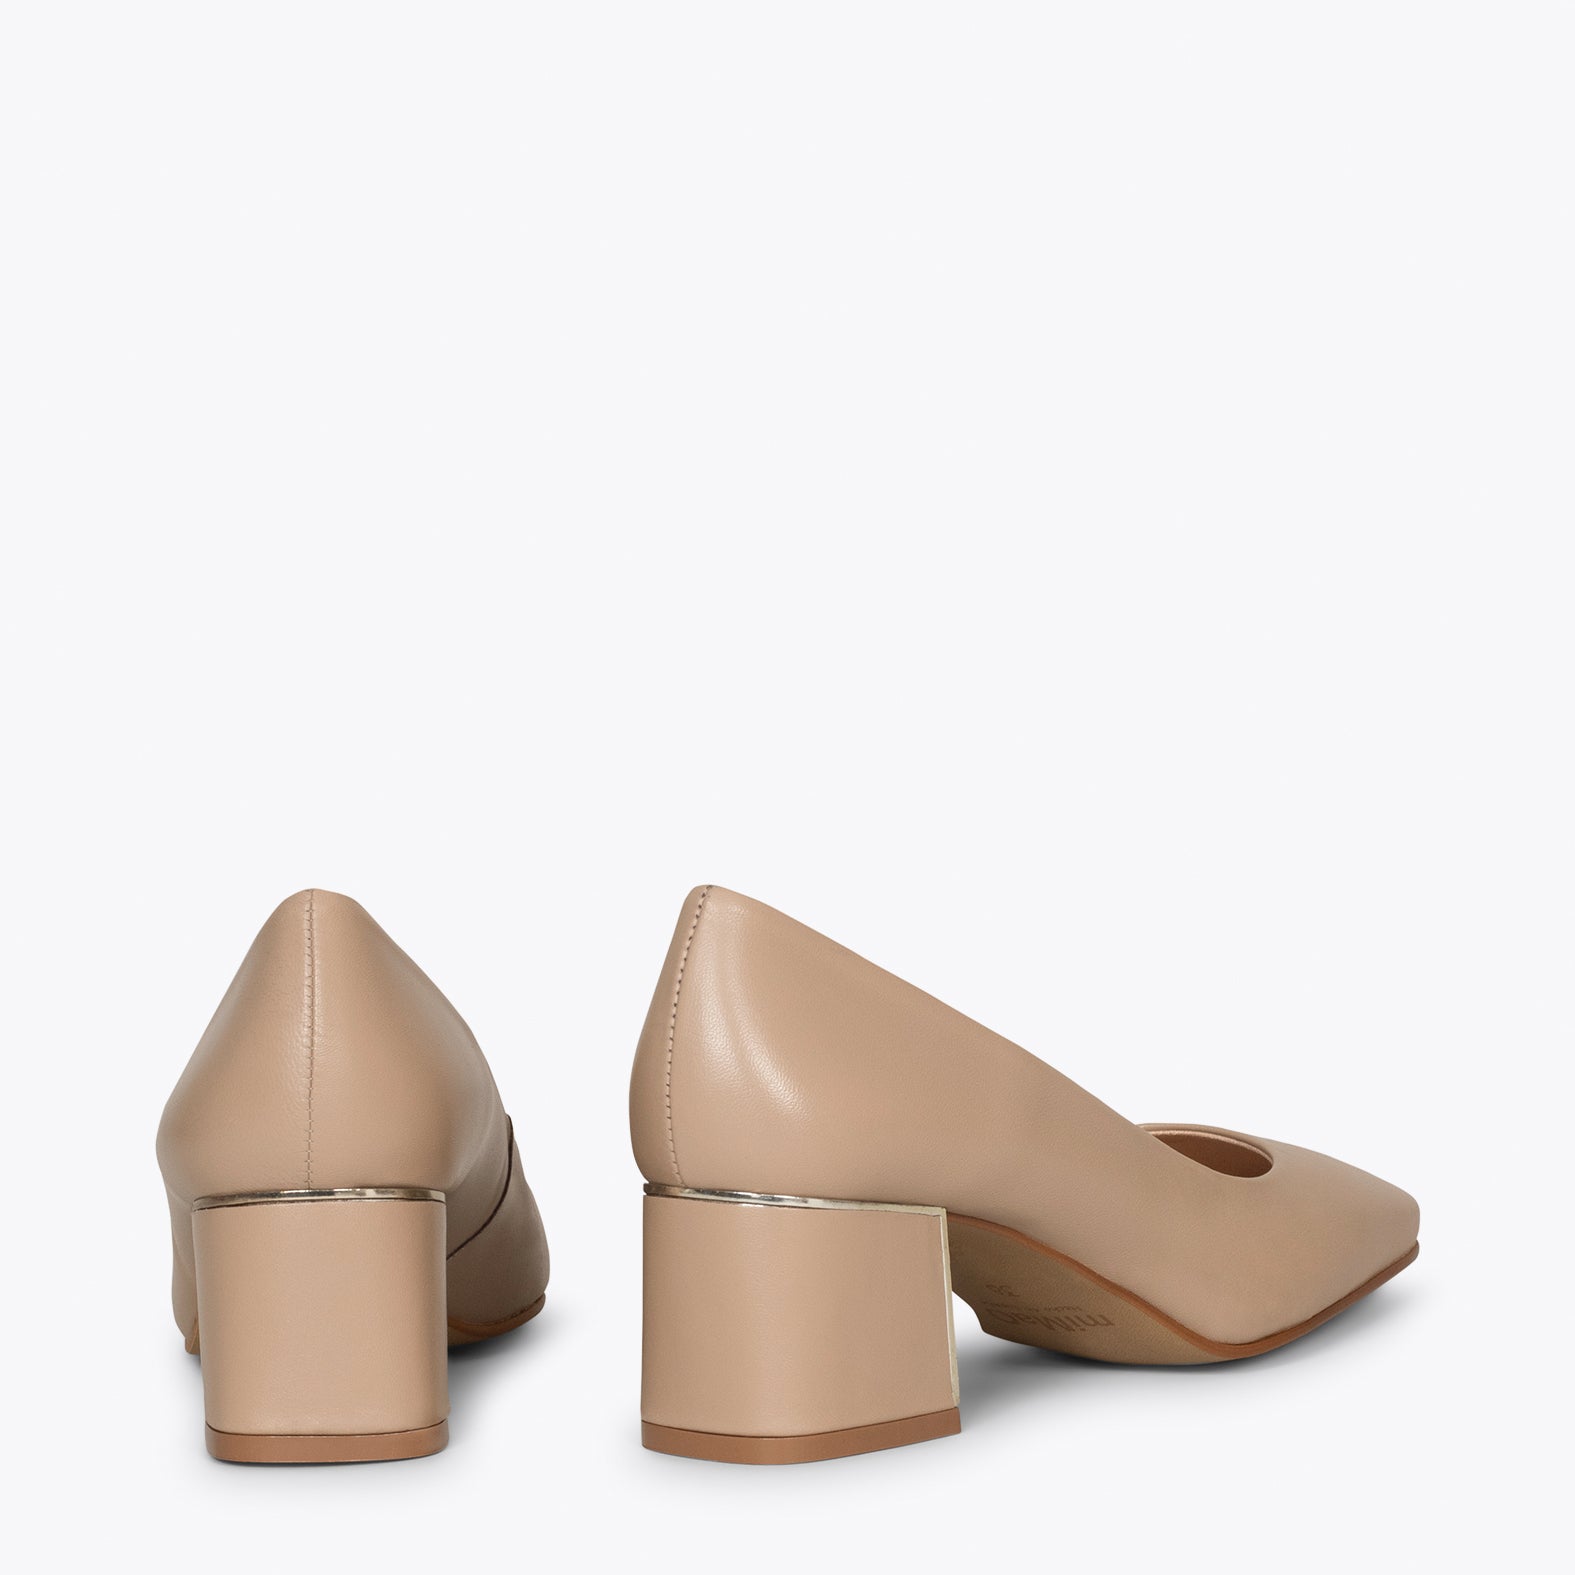 FEMME – BEIGE mid heel shoes with square toe